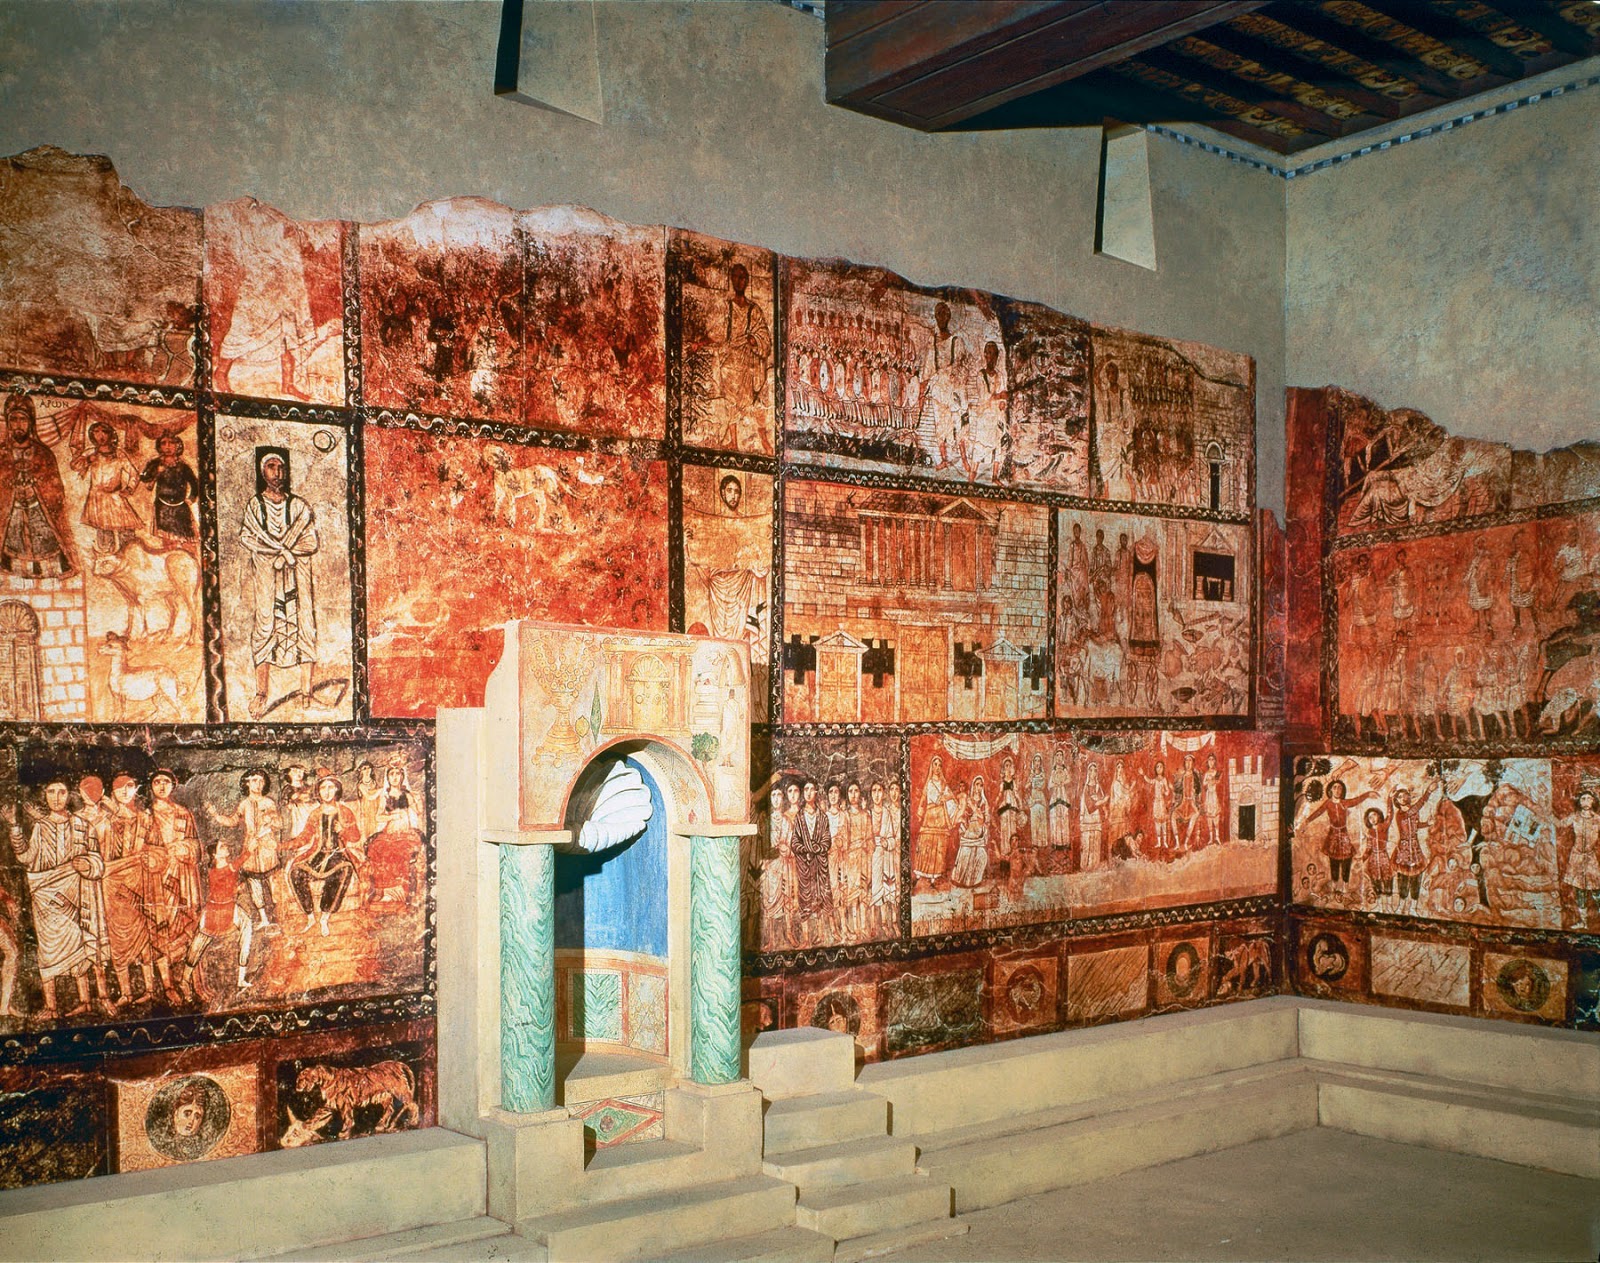 ART and ARCHITECTURE, mainly: Totally rewriting art history!! Dura Europos